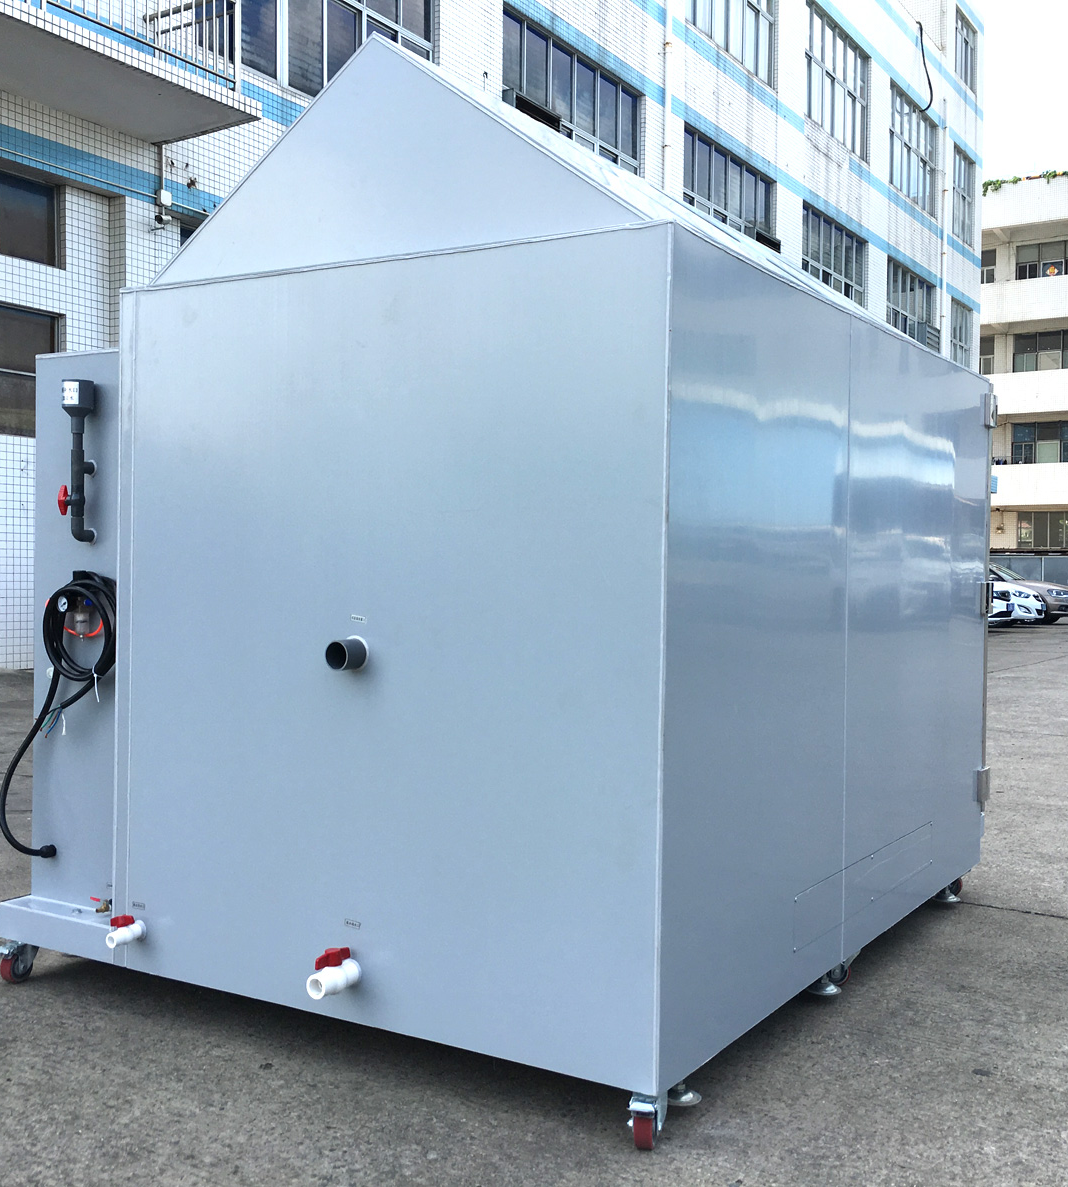 High Quality Thermal Shock Test Chamber: The Key to Enhance the Durability of Your Products